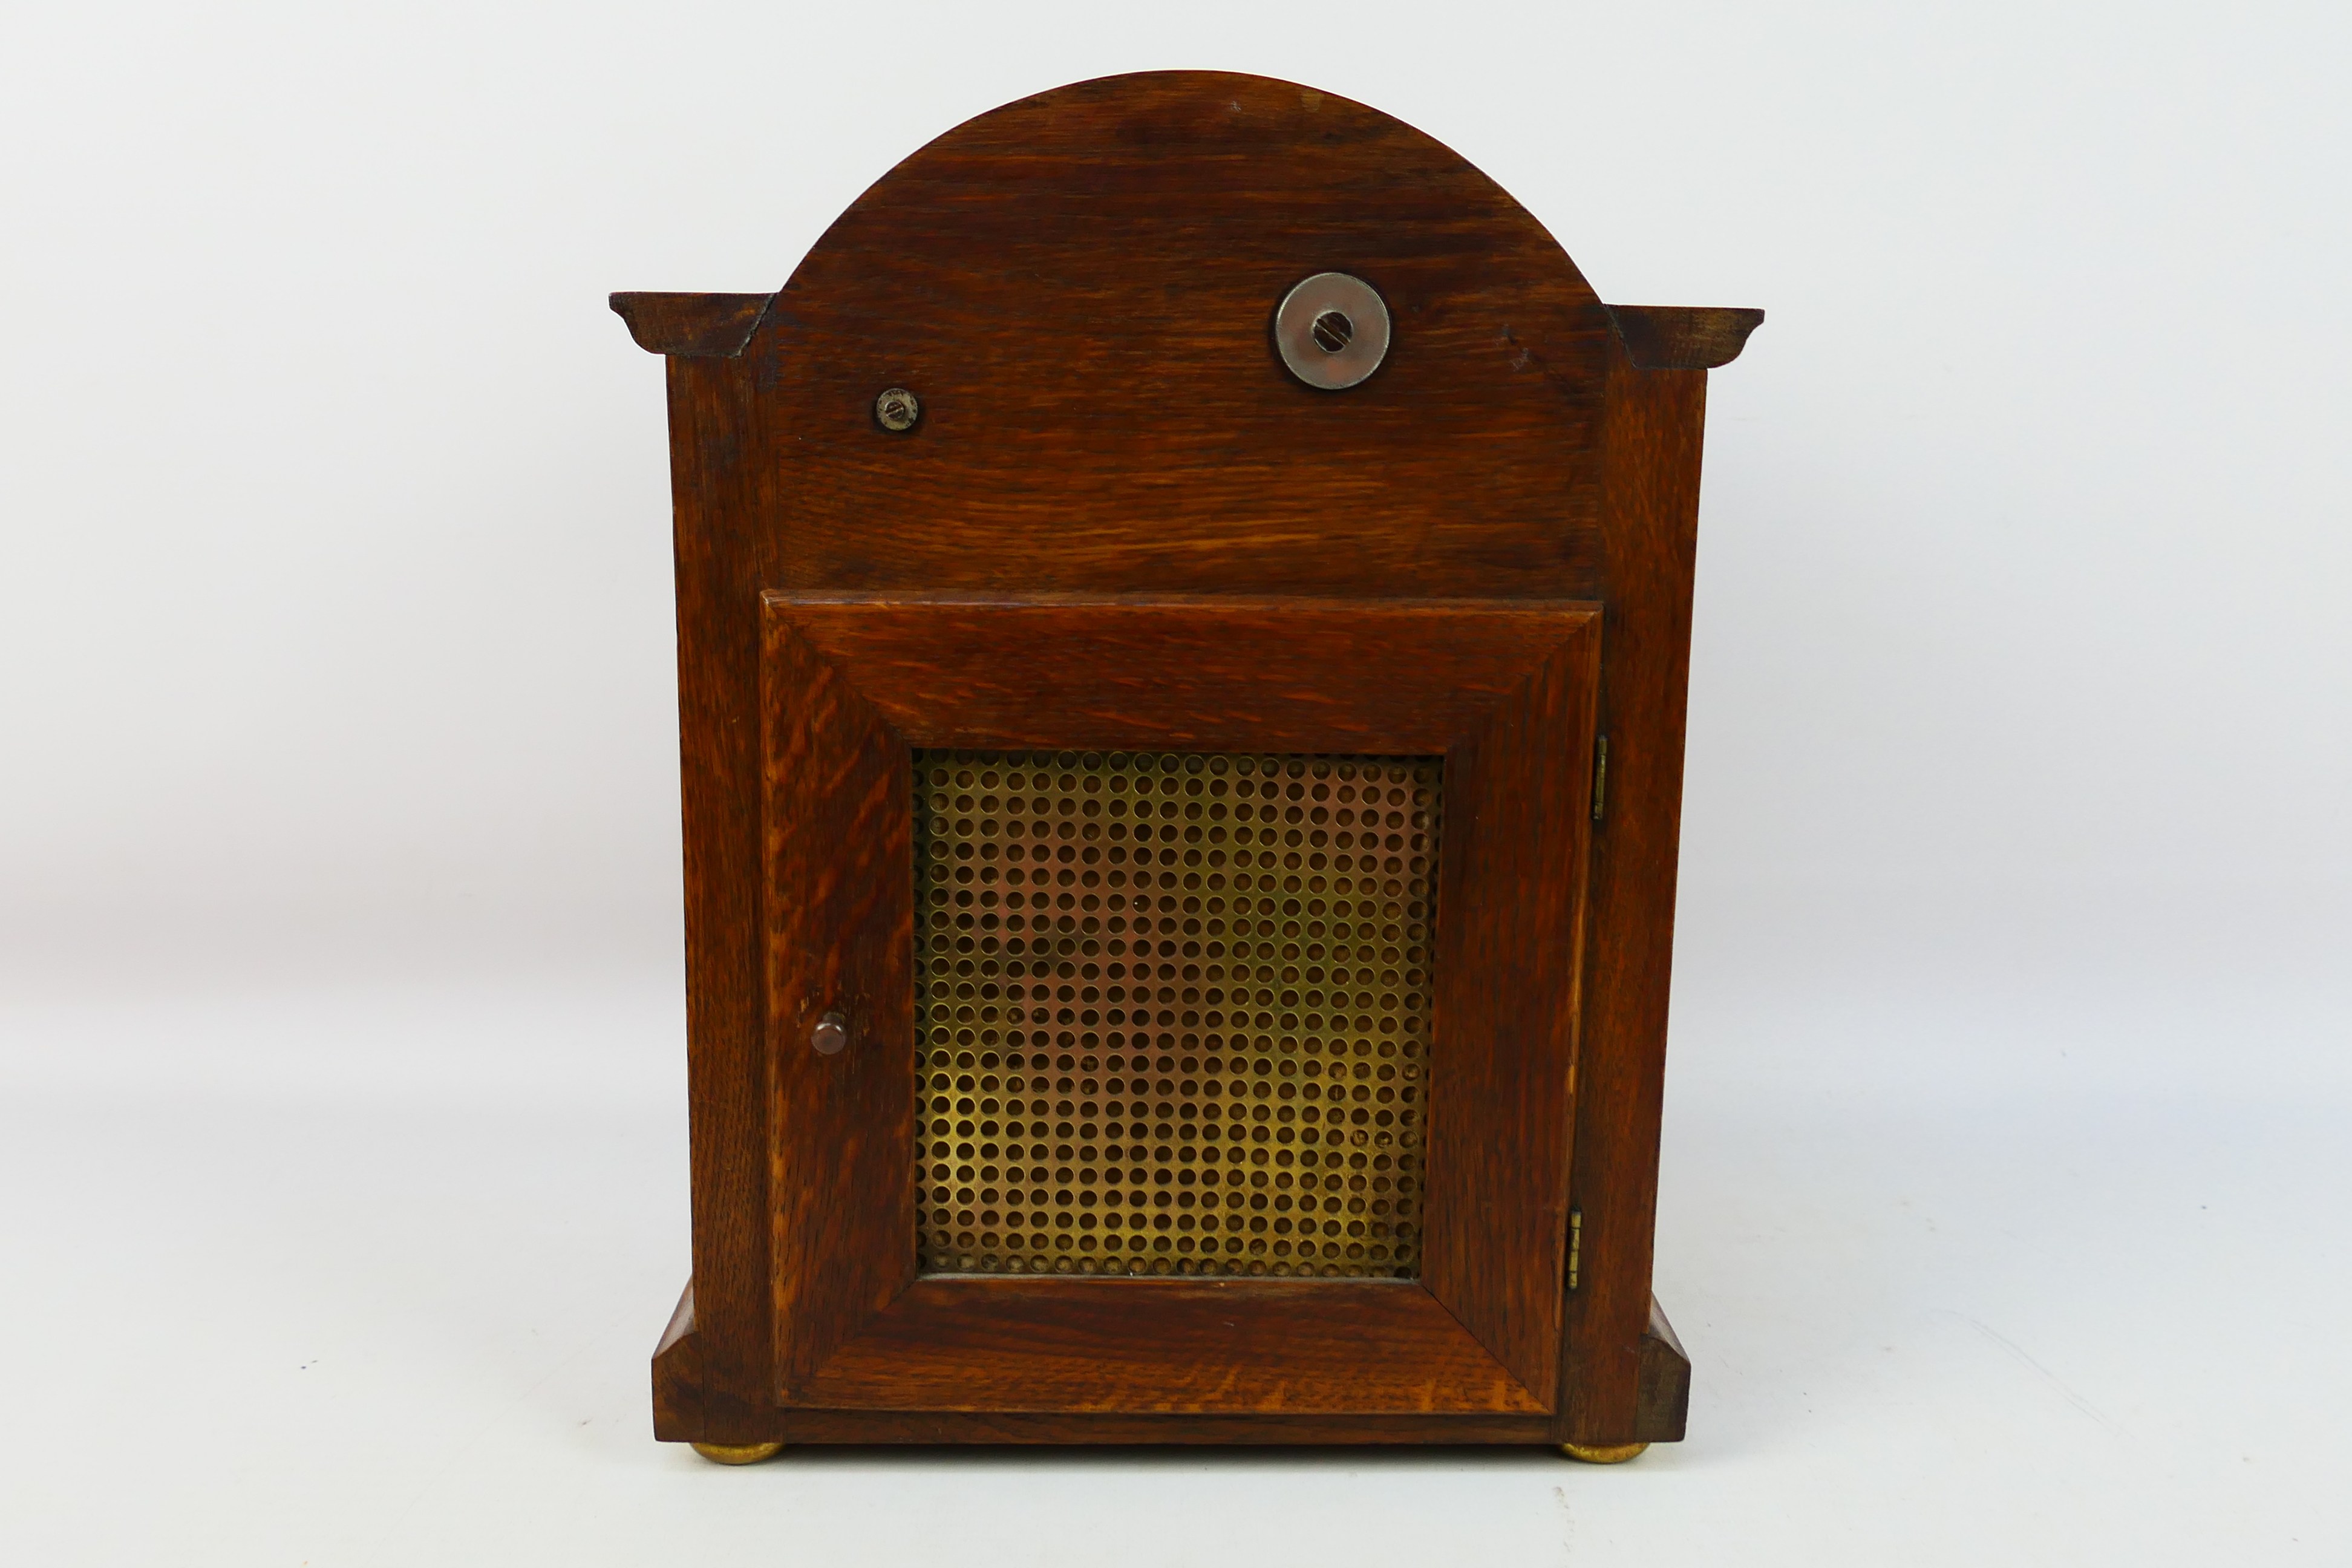 An early 20th century oak cased Westminster chiming mantel clock, the case of a medium oak colour, - Image 7 of 9